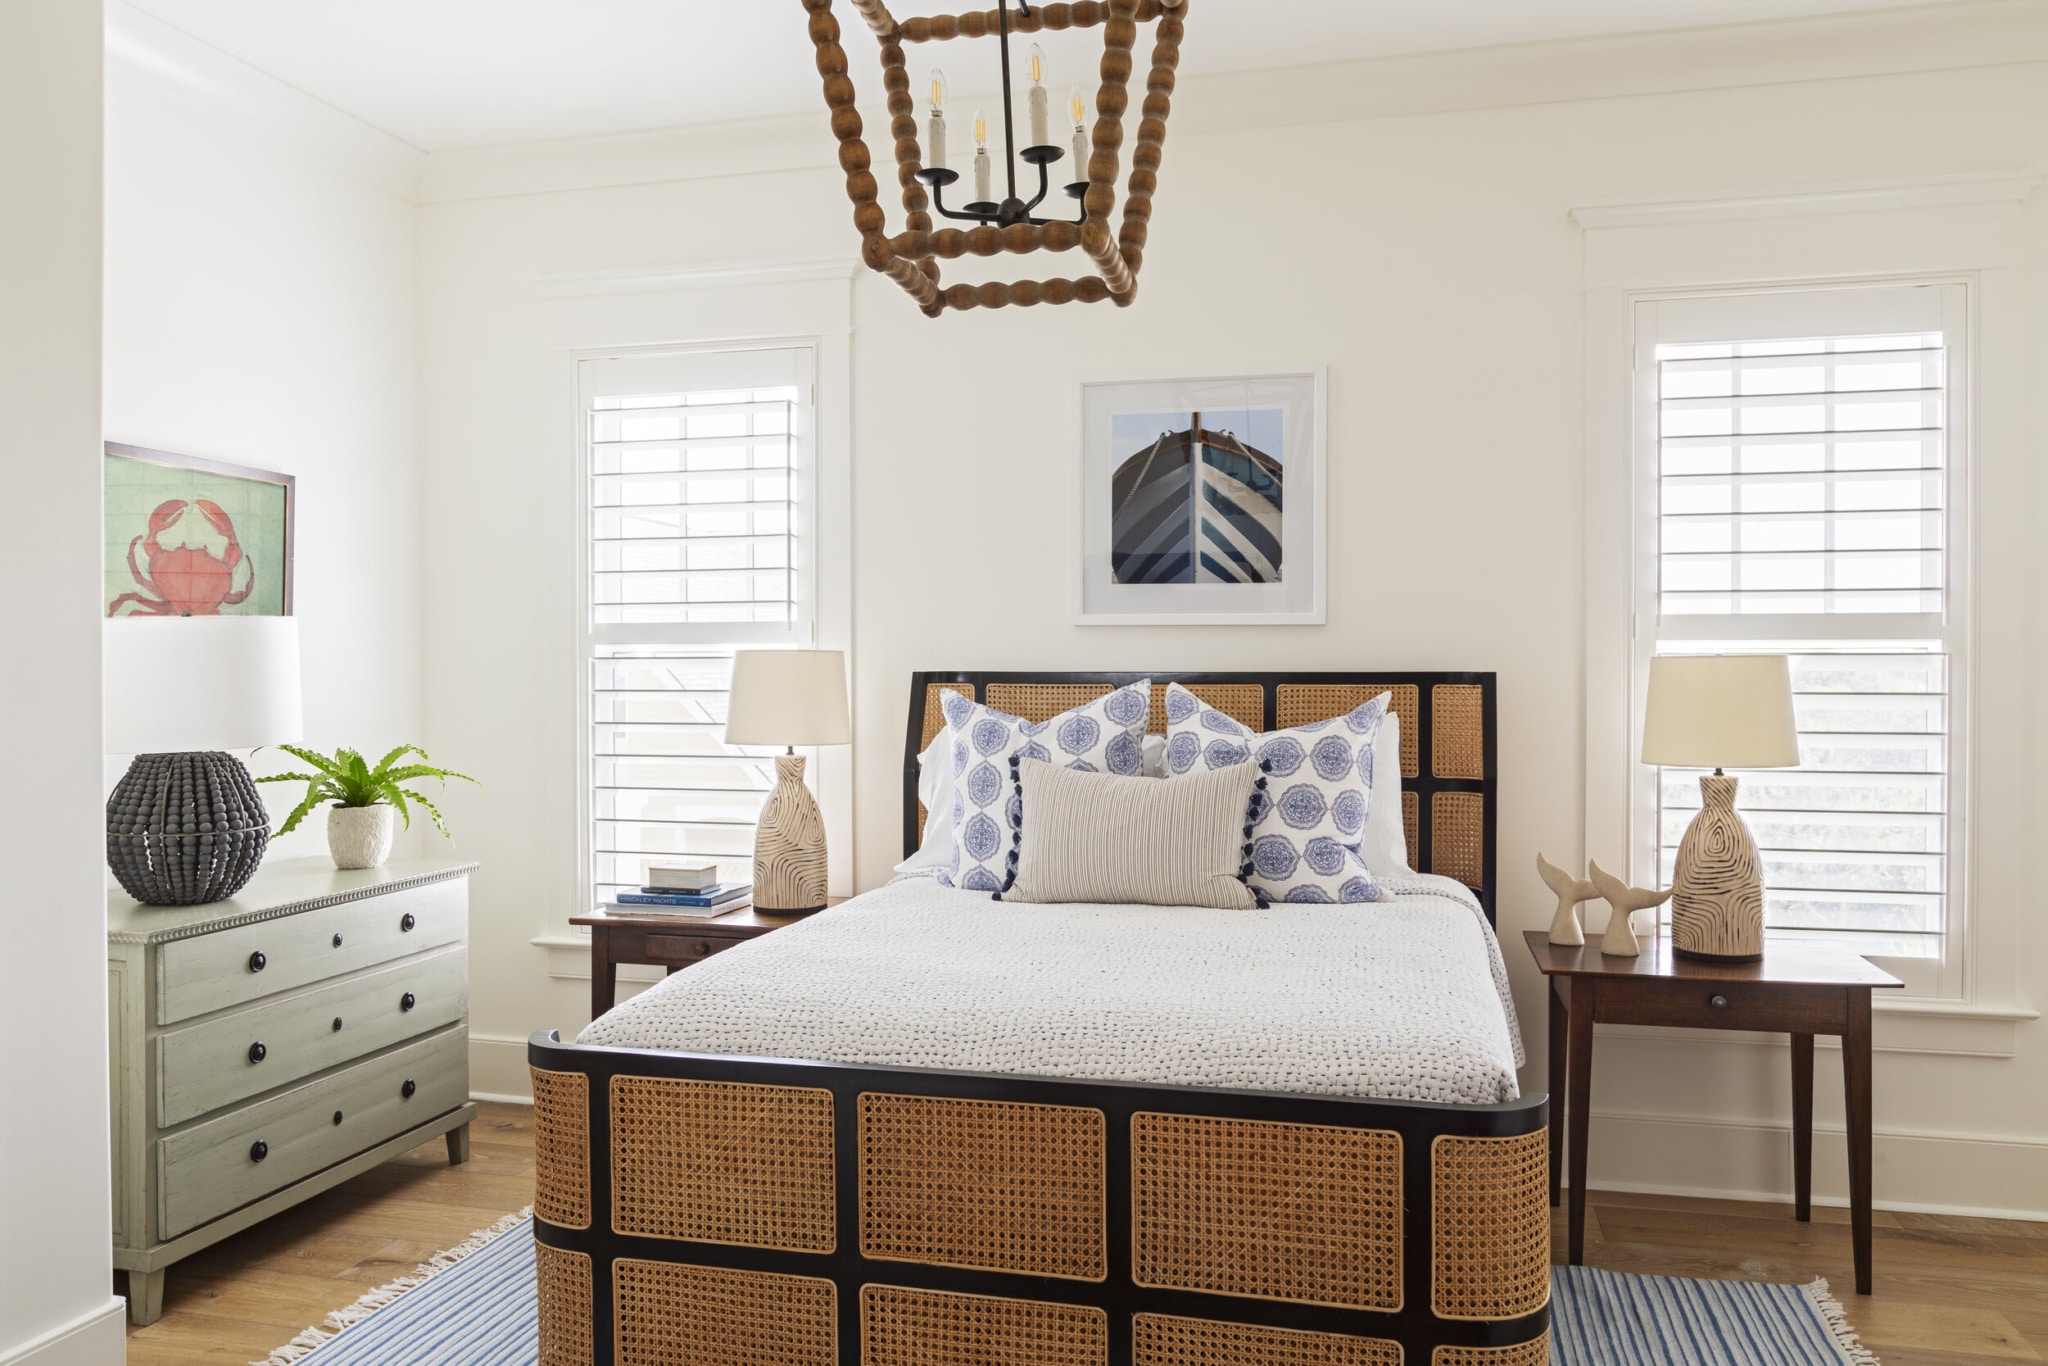 Isle of Palms house tour - Allison Elebash - Julia Lynn Photography -bedroom - blue and white - blue and white bedroom - 